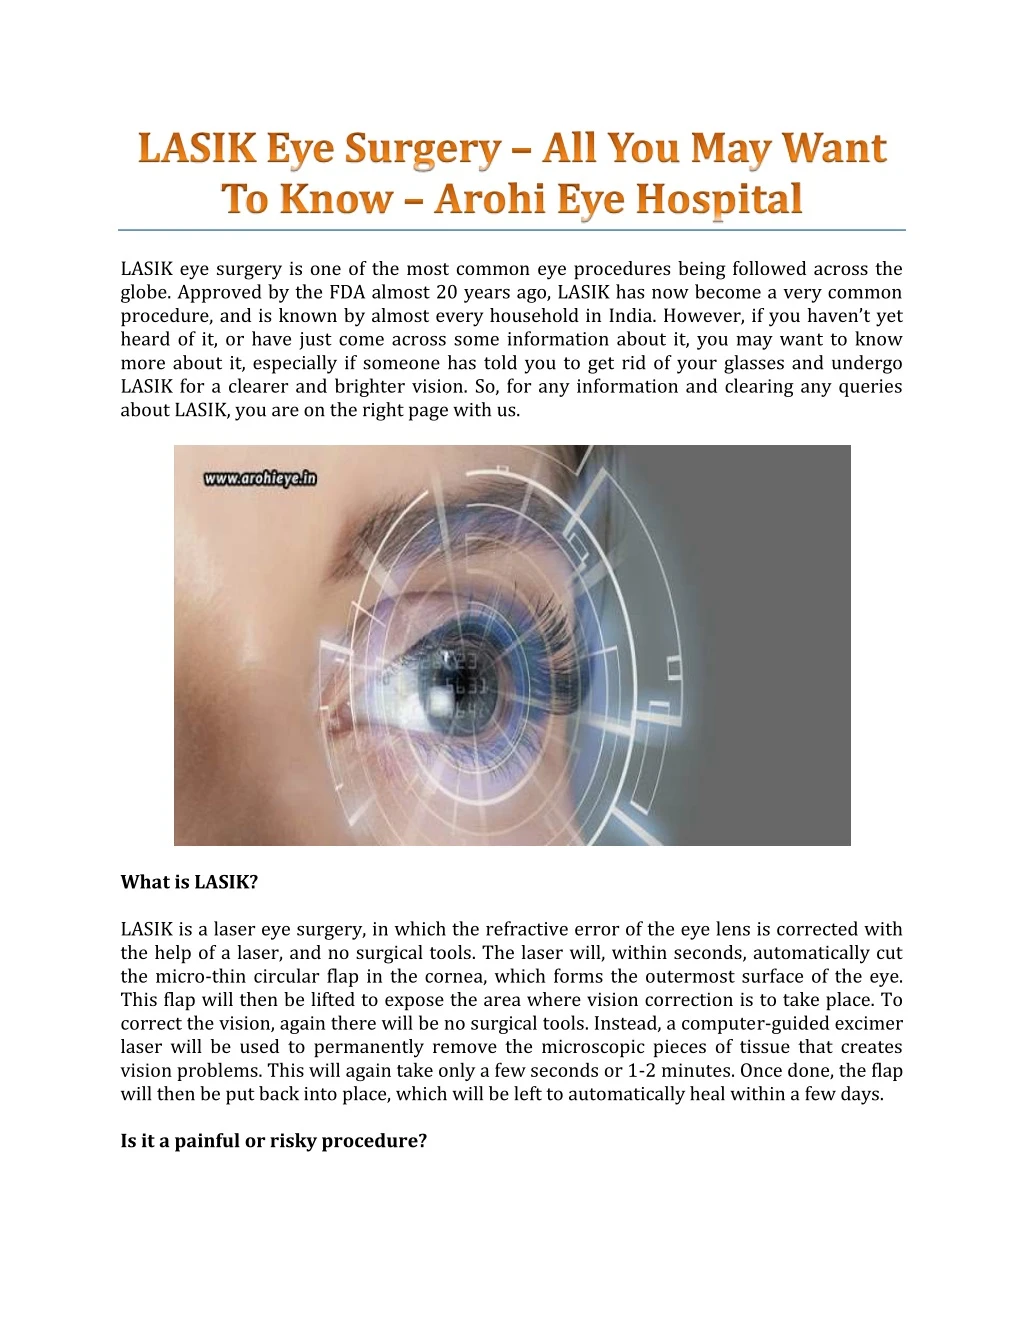 lasik eye surgery is one of the most common